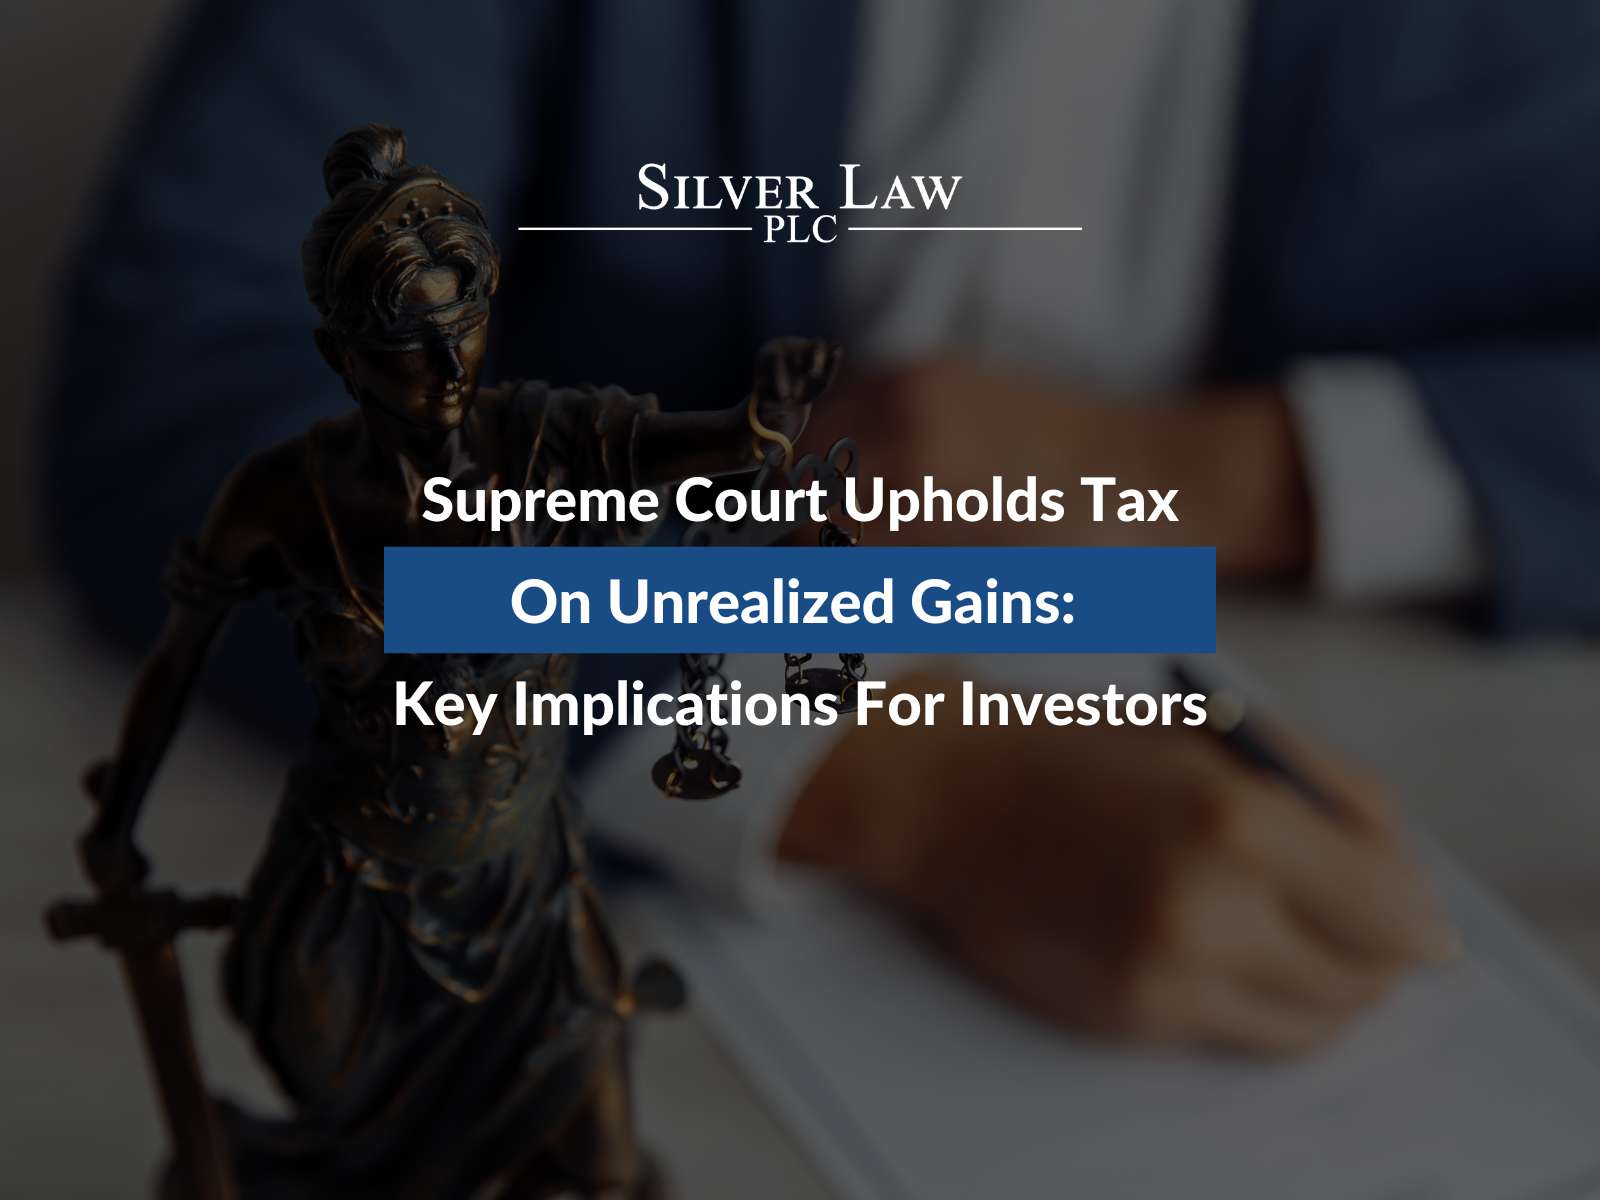 Supreme Court Upholds Tax On Unrealized Gains: Key Implications For Investors